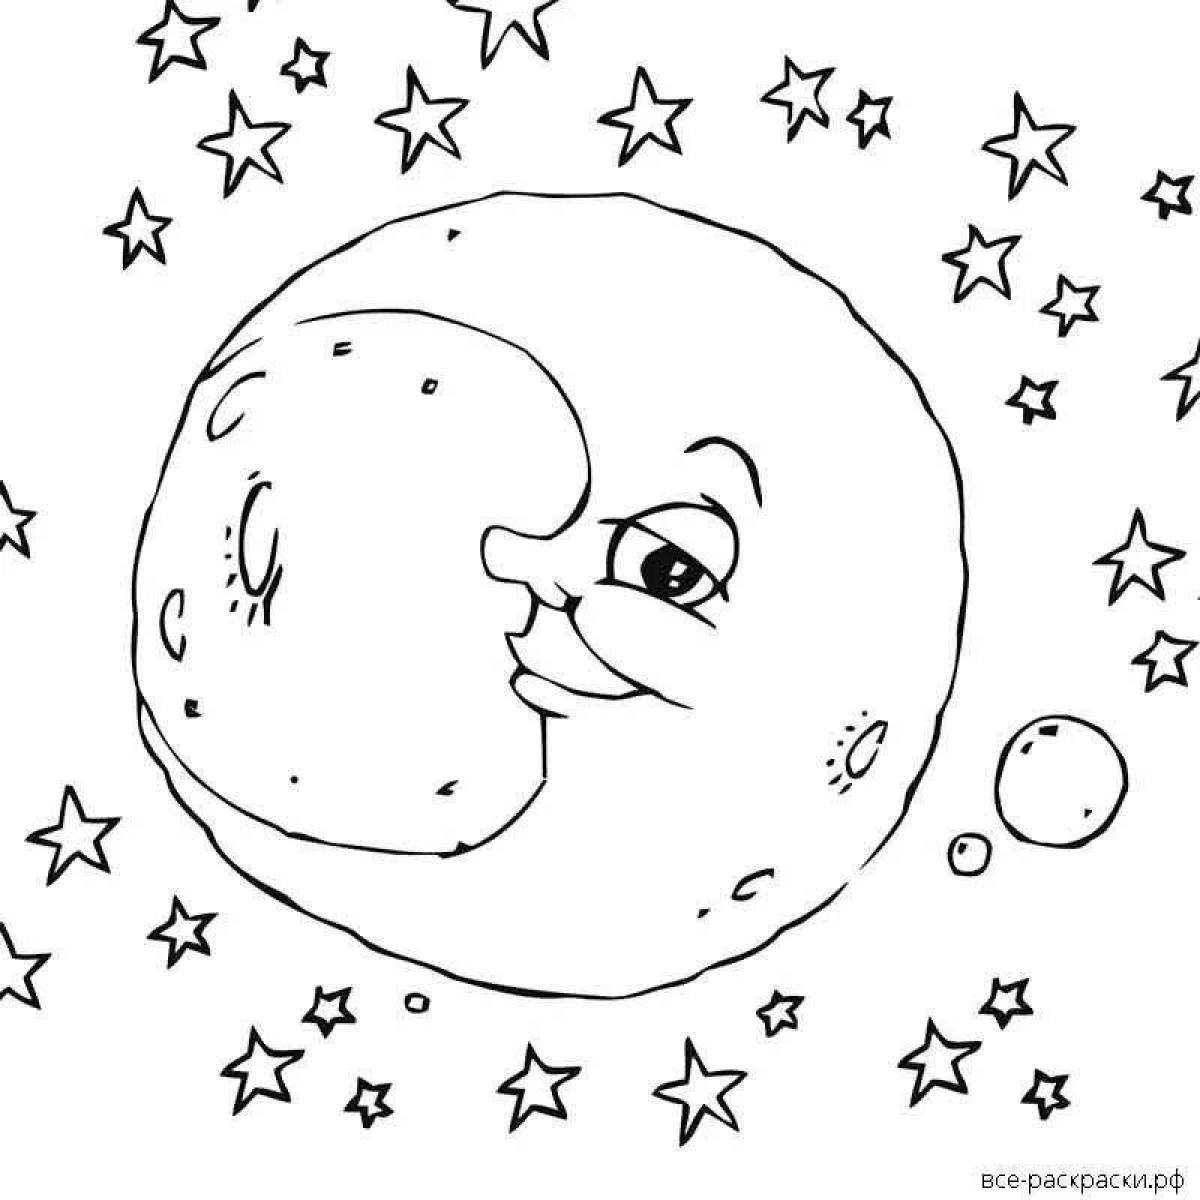 Dreamy moon coloring for kids